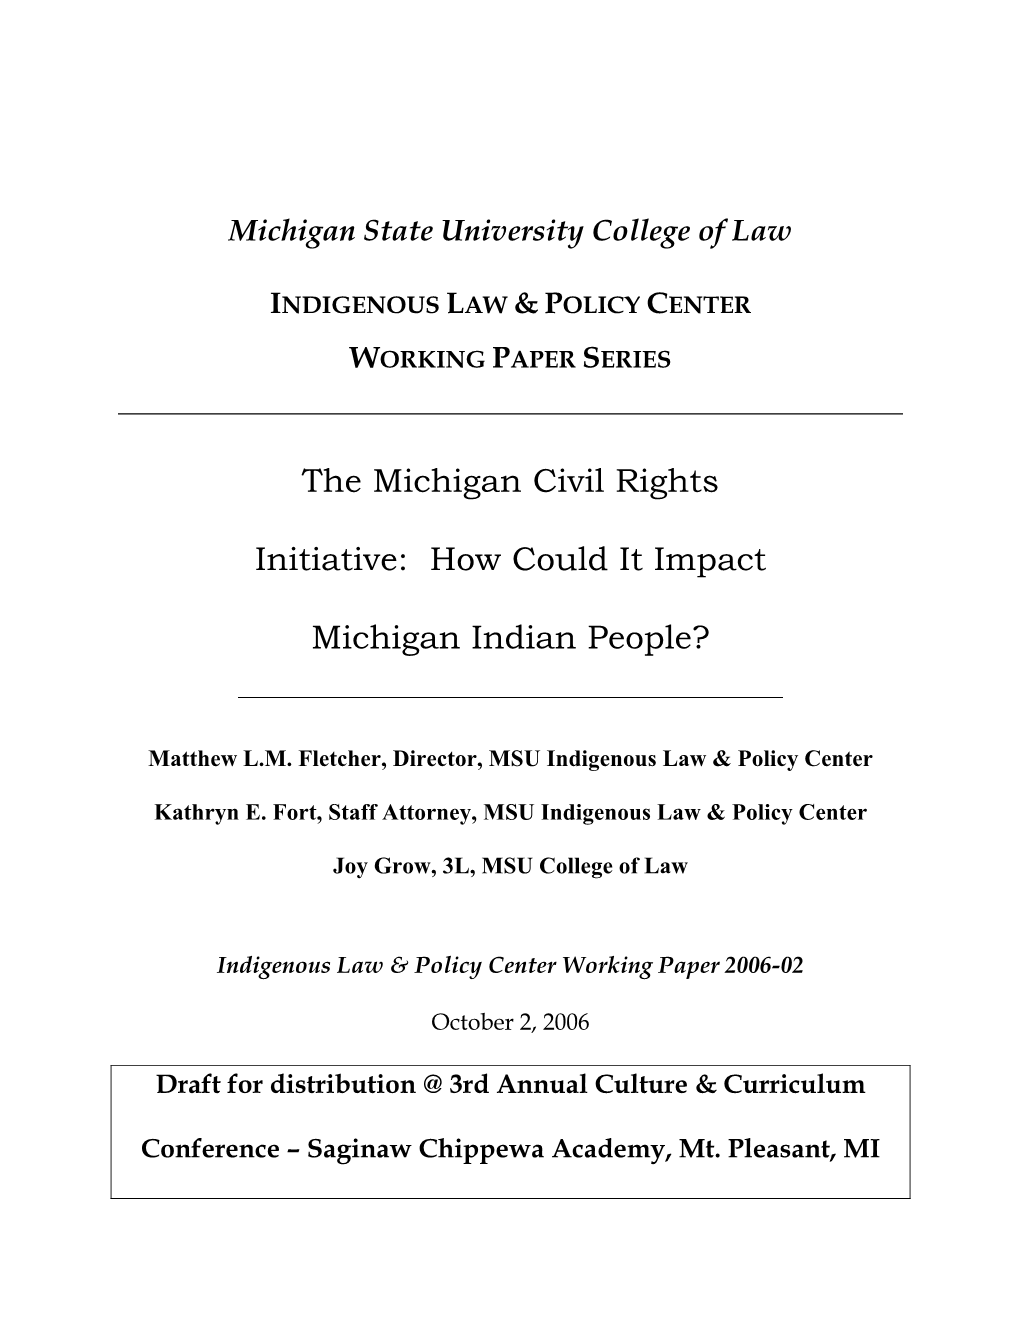 The Michigan Civil Rights Initiative: How Could It Impact Michigan Indian People?